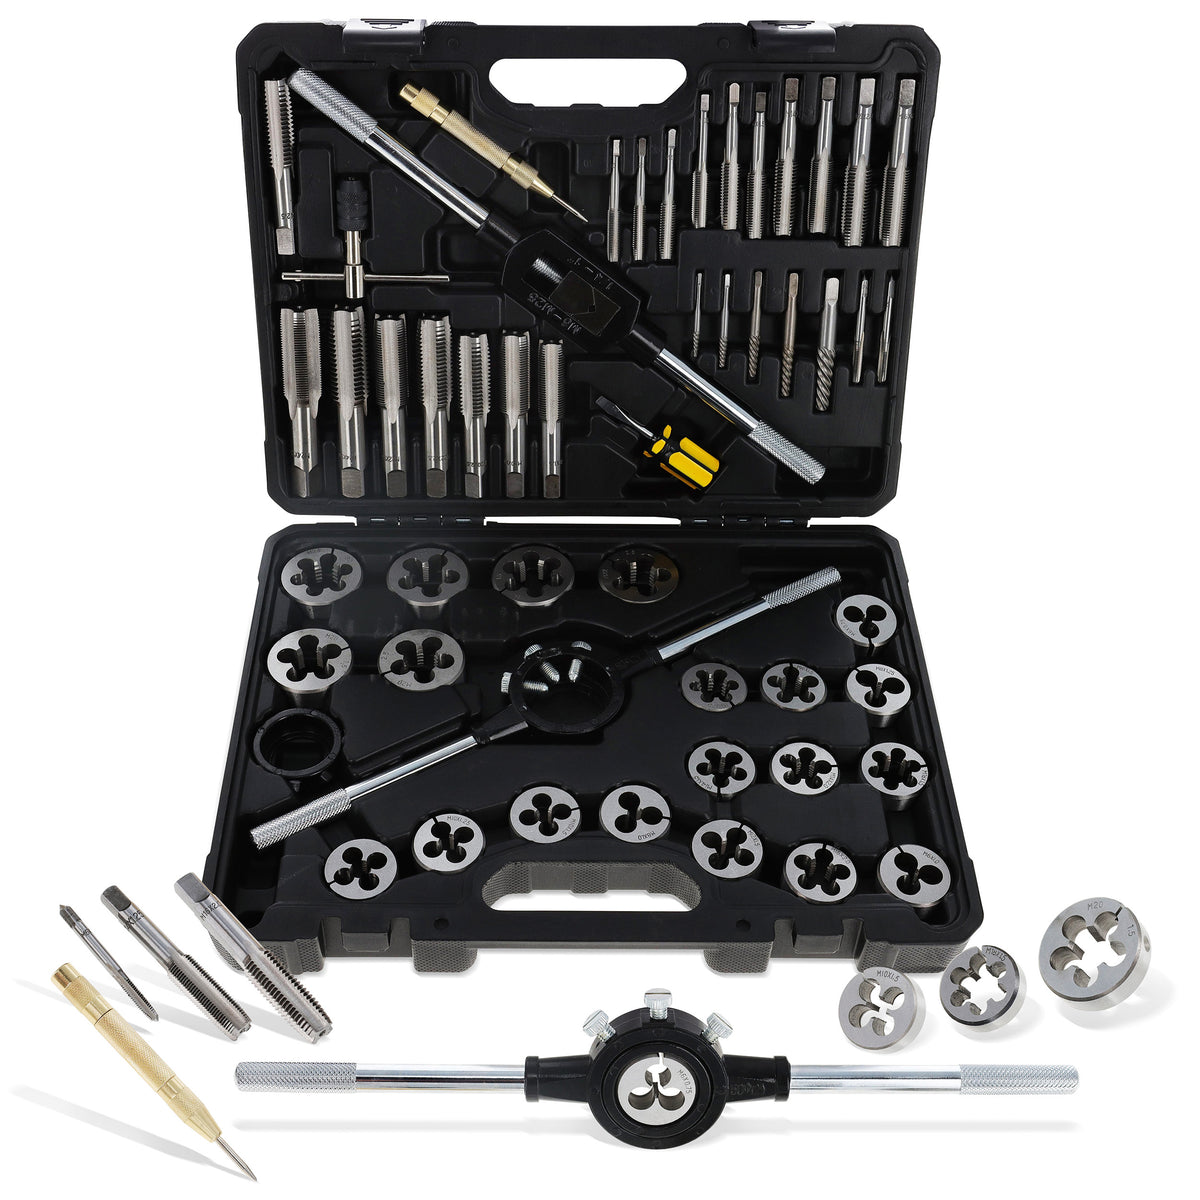 51 Piece Tap Die Set Metric and Standard Kits for Rethreading